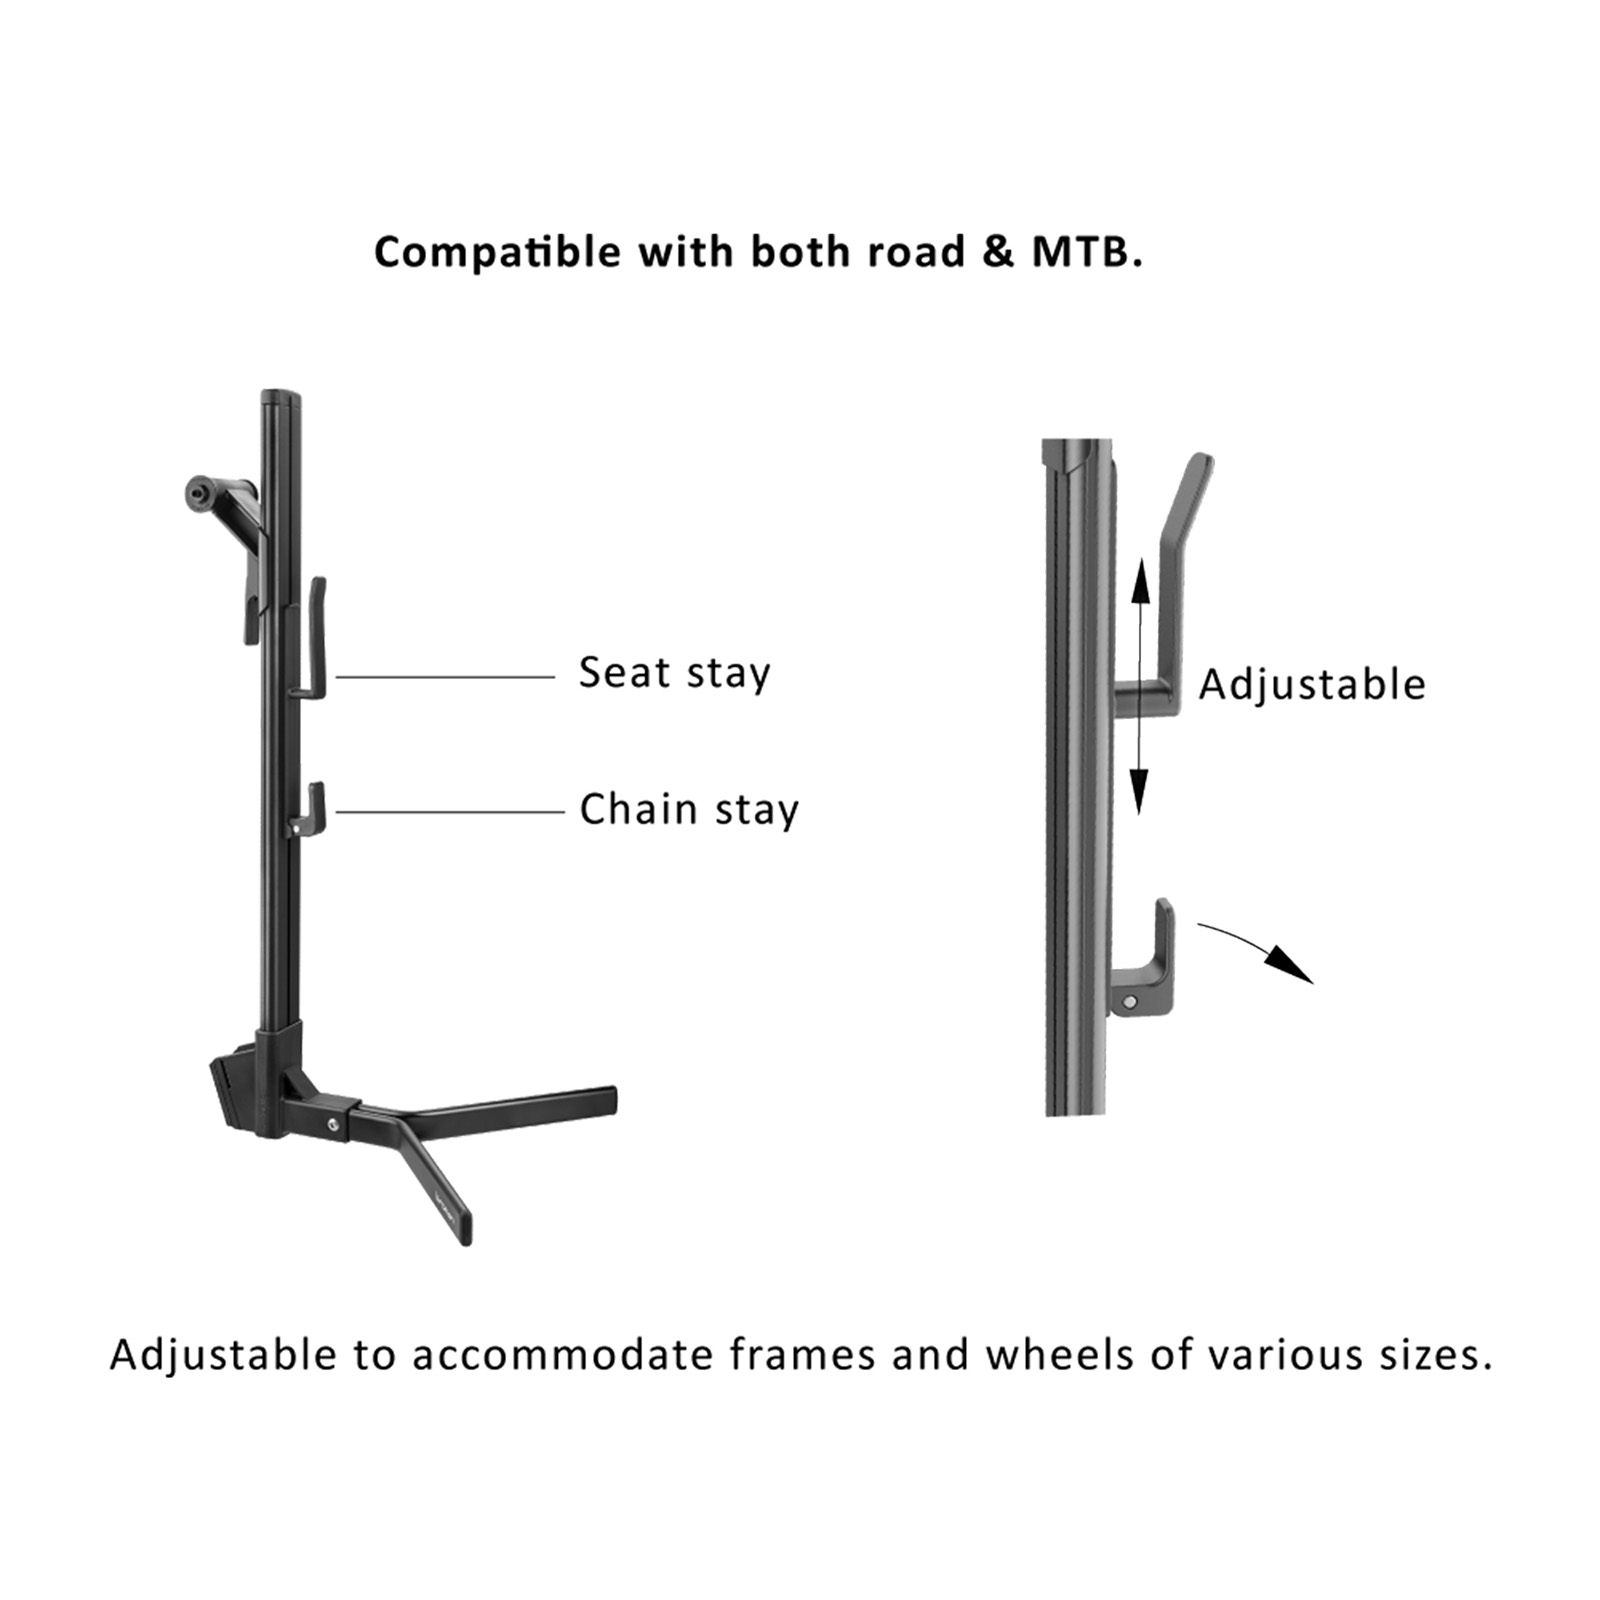 Image showing the repair stand setup for road bike and MTB bikes.